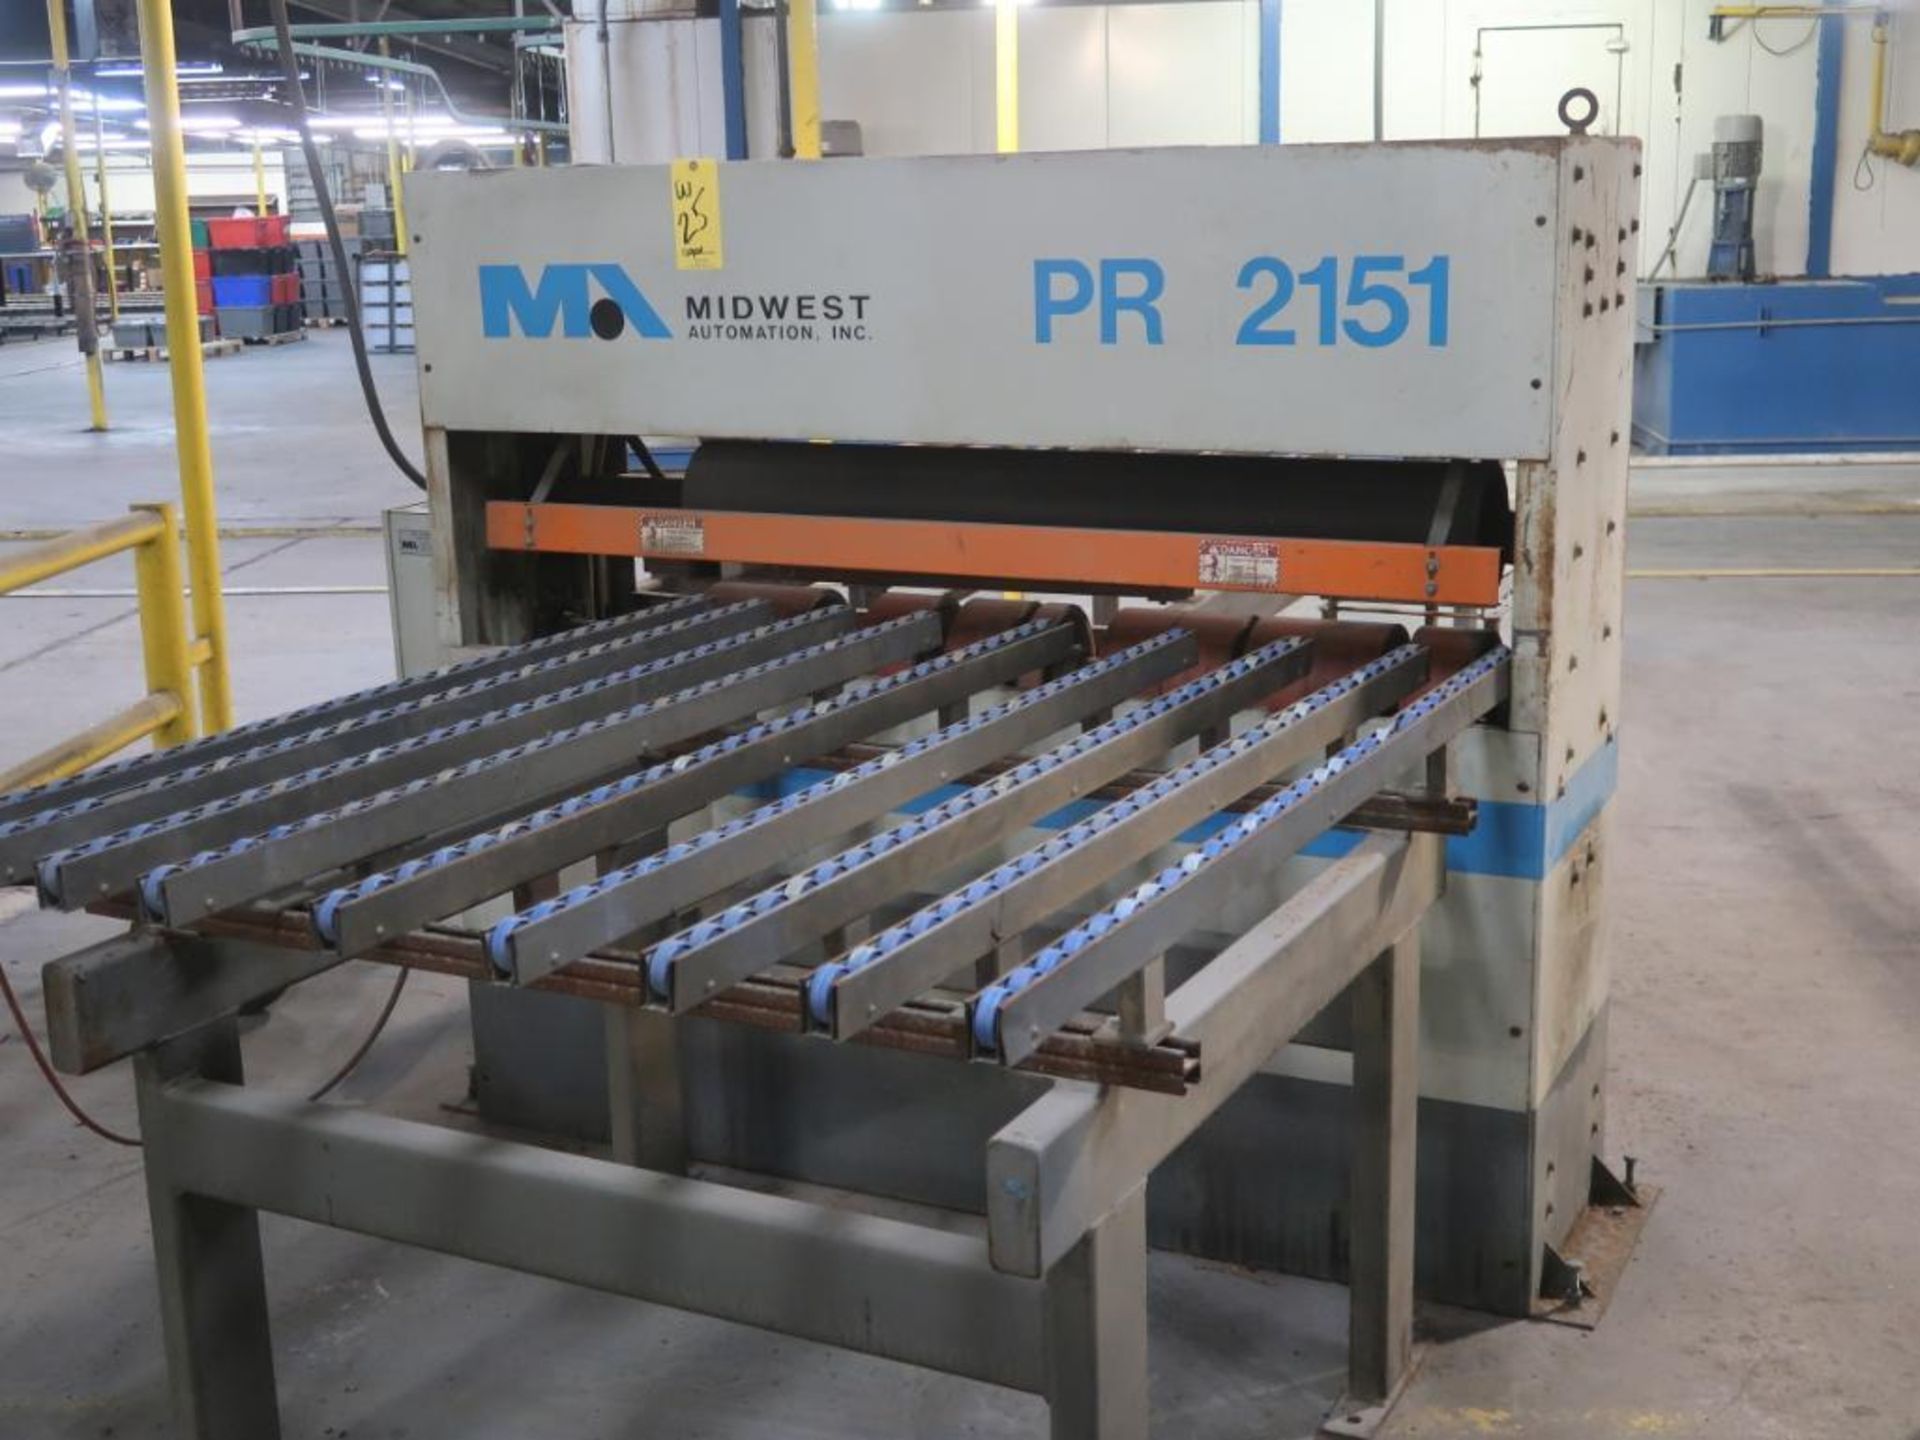 LOT: Midwest Segmented Laminating Pinch Roller, Midwest Heat Tunnel (partial), with Conveyors